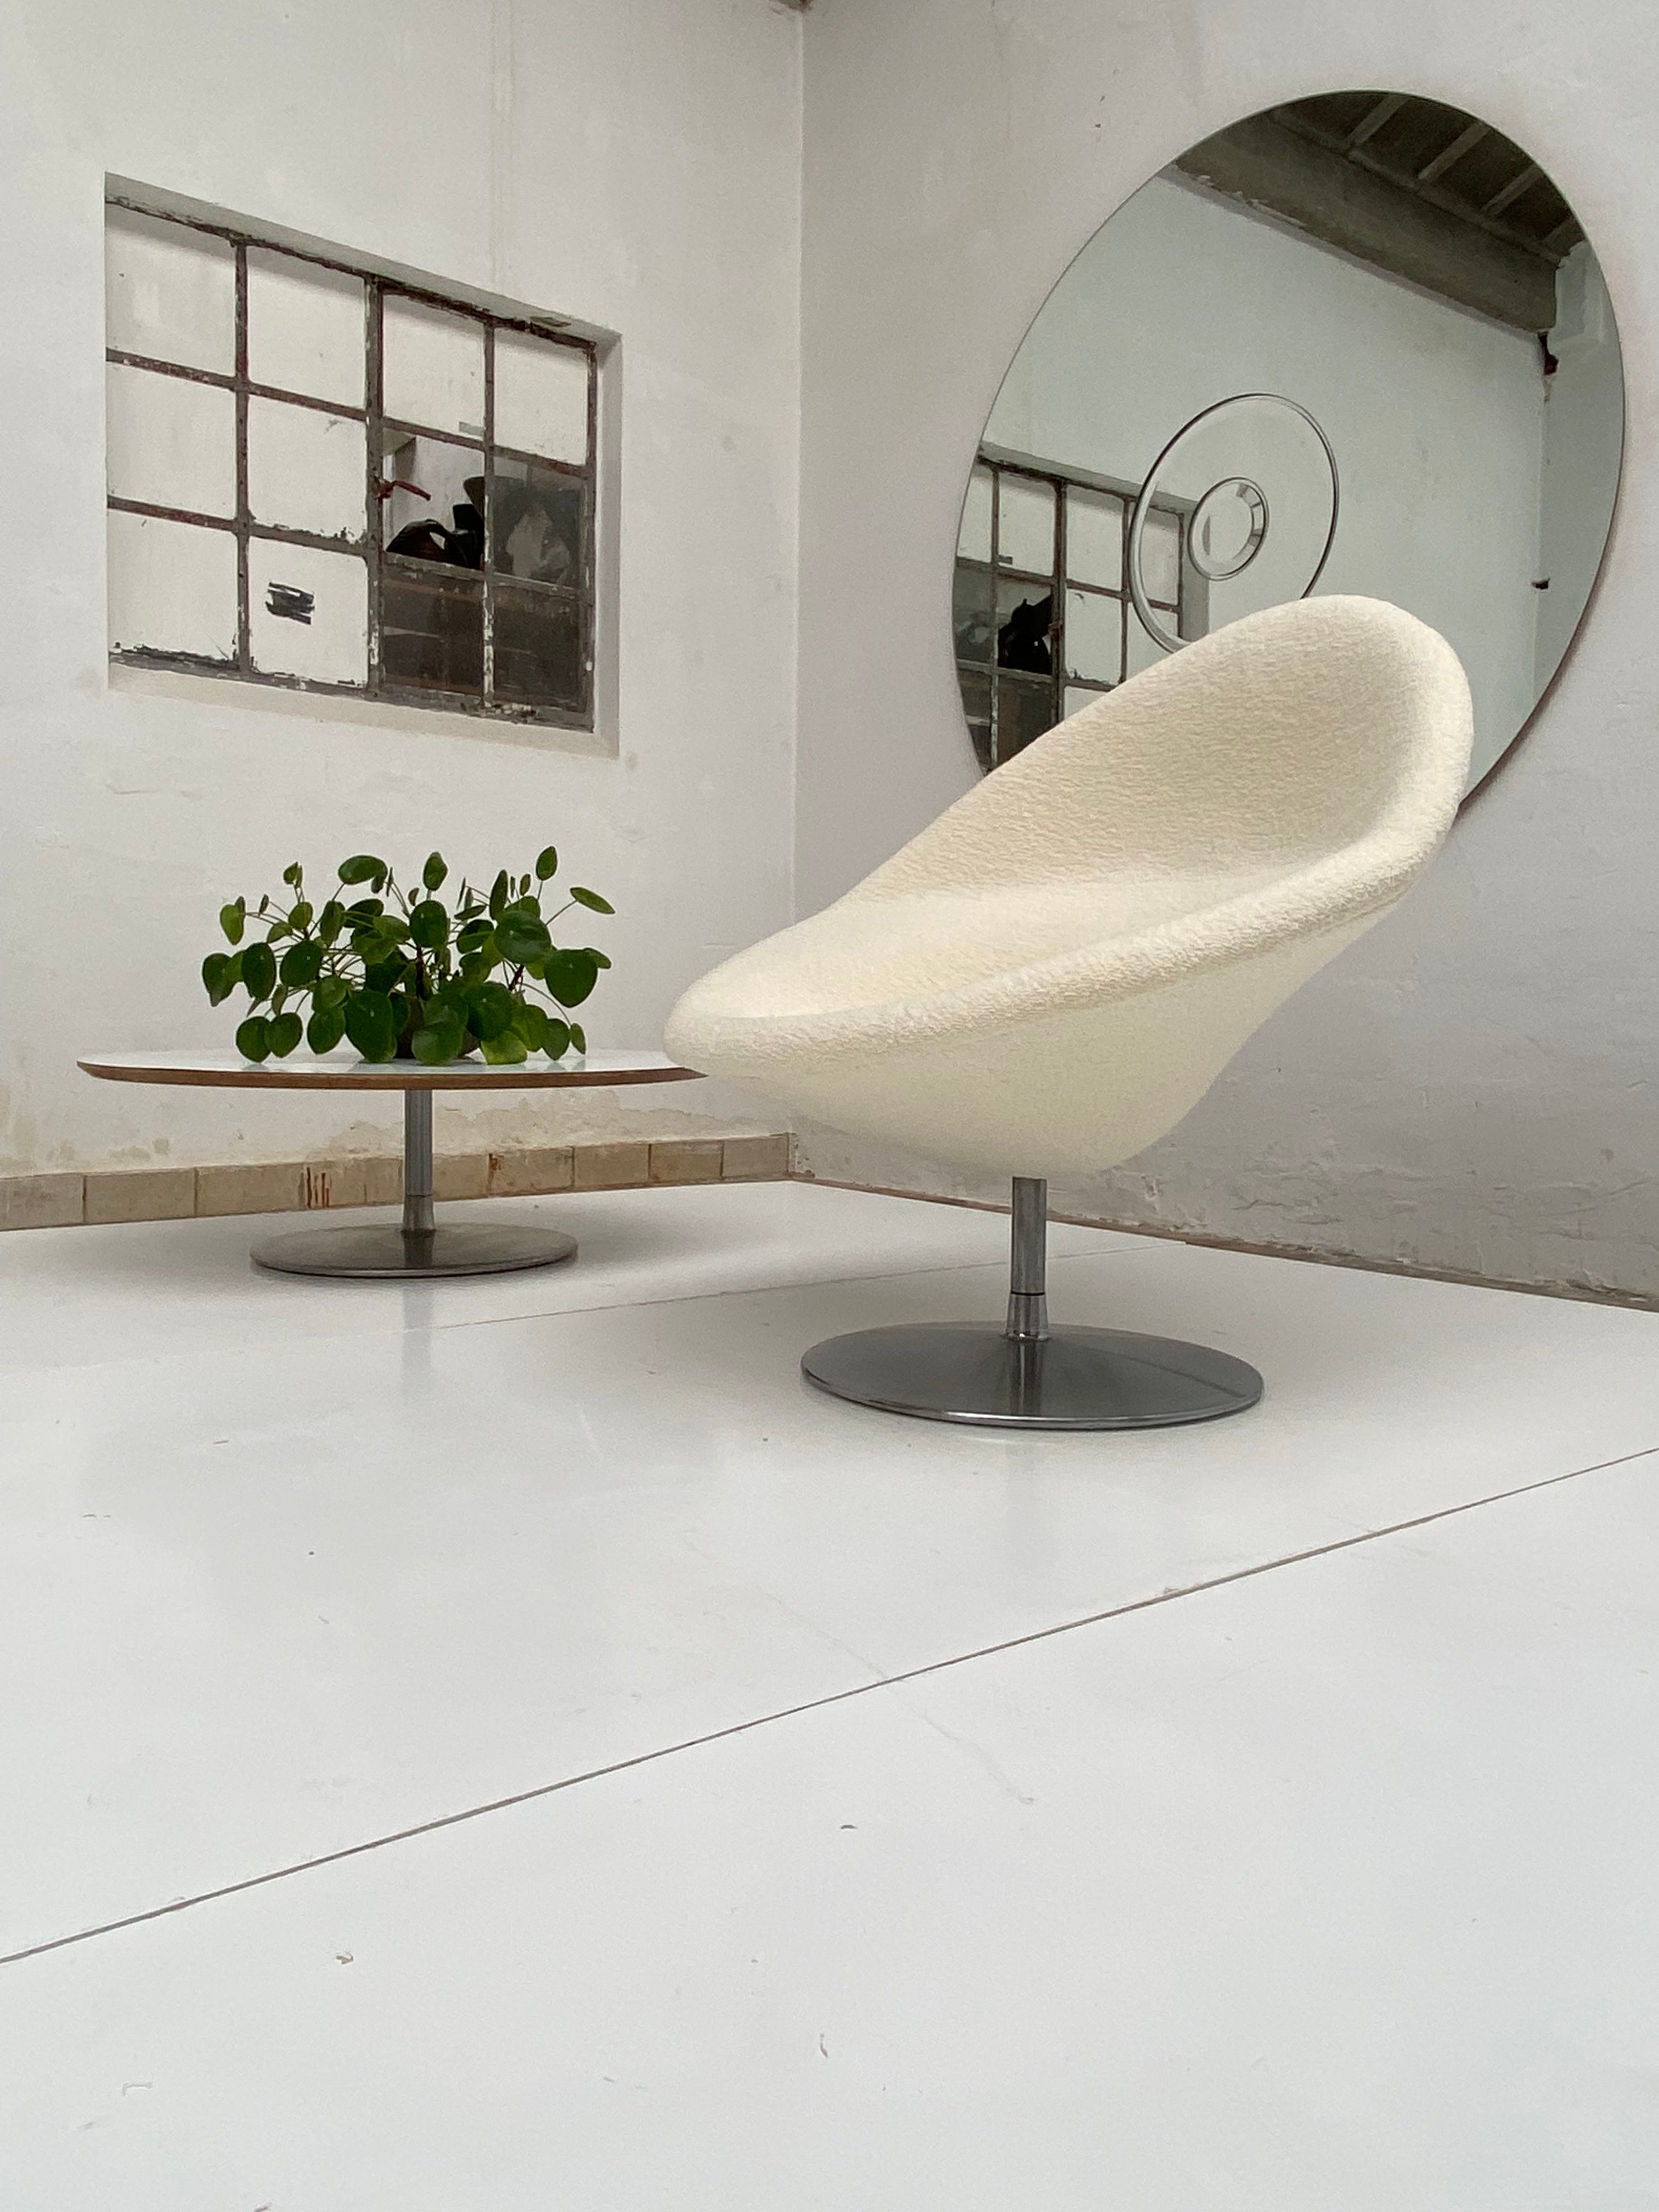 A unique oppertunity to purchase an ensemble of a Globe lounge chair and a Circle Coffeetable by Pierre Paulin for Artifort The Netherlands

The Globe chair was designed in 1959 by French designer Pierre Paulin who worked in that period for Dutch